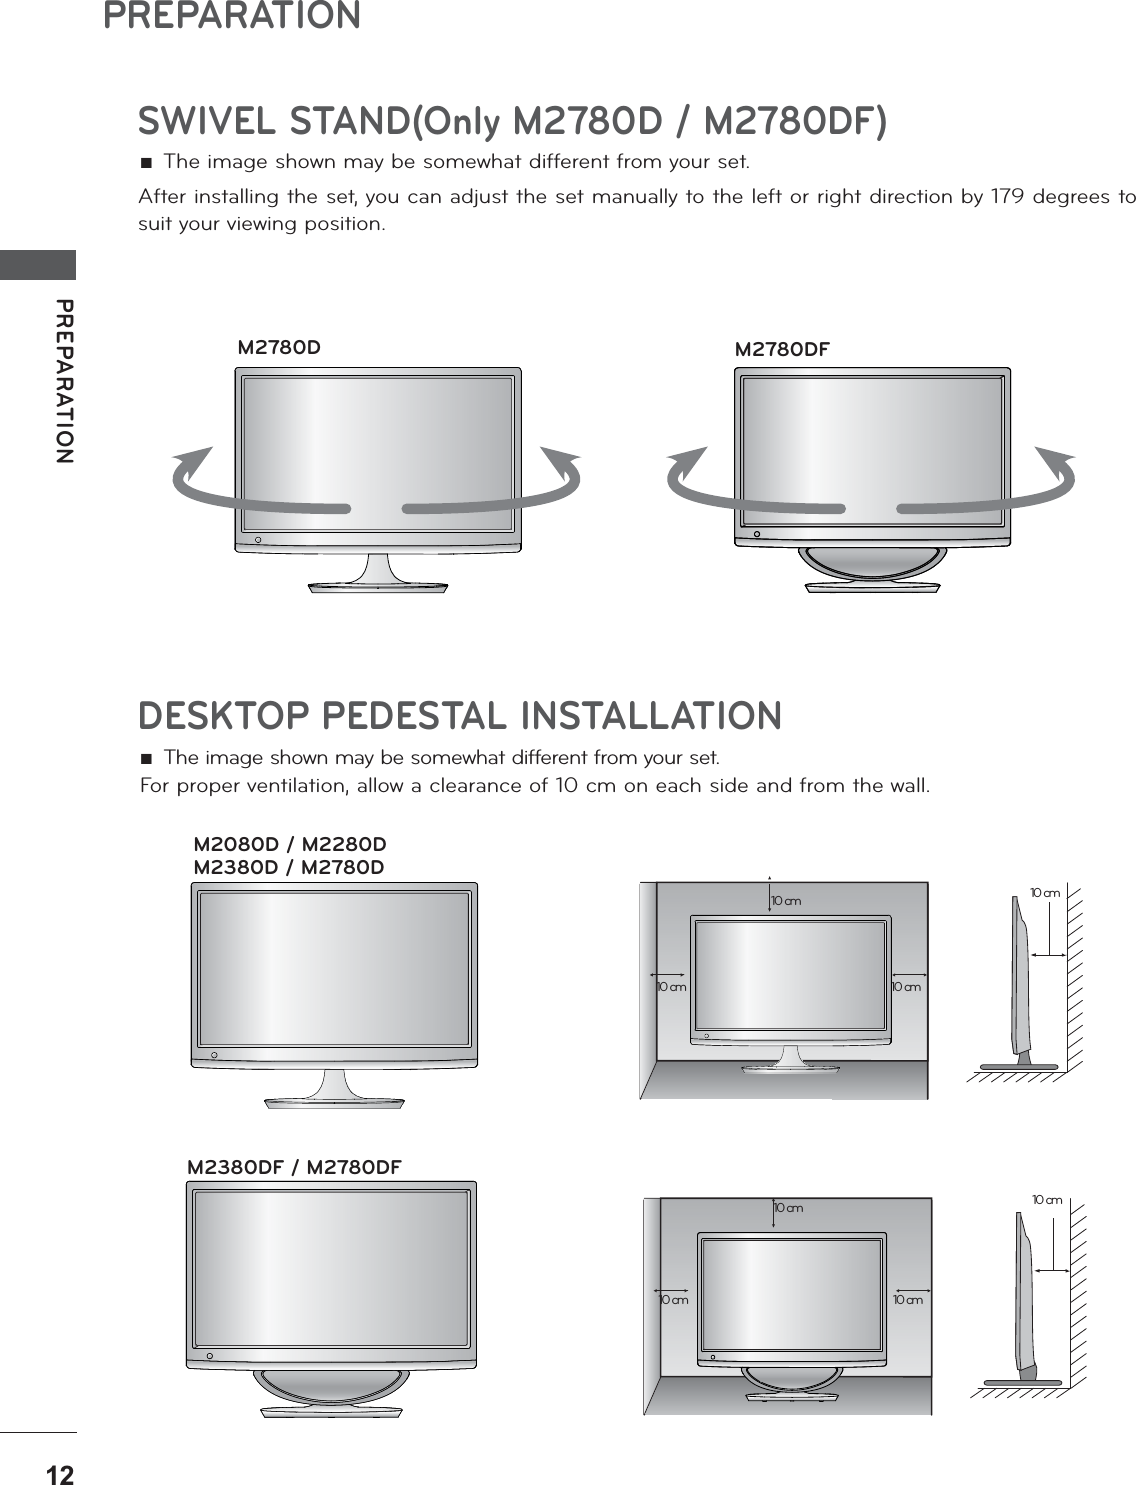 PREPARATIONPREPARATIONDESKTOP PEDESTAL INSTALLATIONFor proper ventilation, allow a clearance of 10 cm on each side and from the wall. ŶThe image shown may be somewhat different from your set.10 cm10 cm 10 cm10 cm10 cm10 cm 10 cm10 cmM2080D / M2280DM2380D / M2780DM2380DF / M2780DFSWIVEL STAND(Only M2780D / M2780DF) ŶThe image shown may be somewhat different from your set.After installing the set, you can adjust the set manually to the left or right direction by 179 degrees to suit your viewing position.M2780D M2780DF